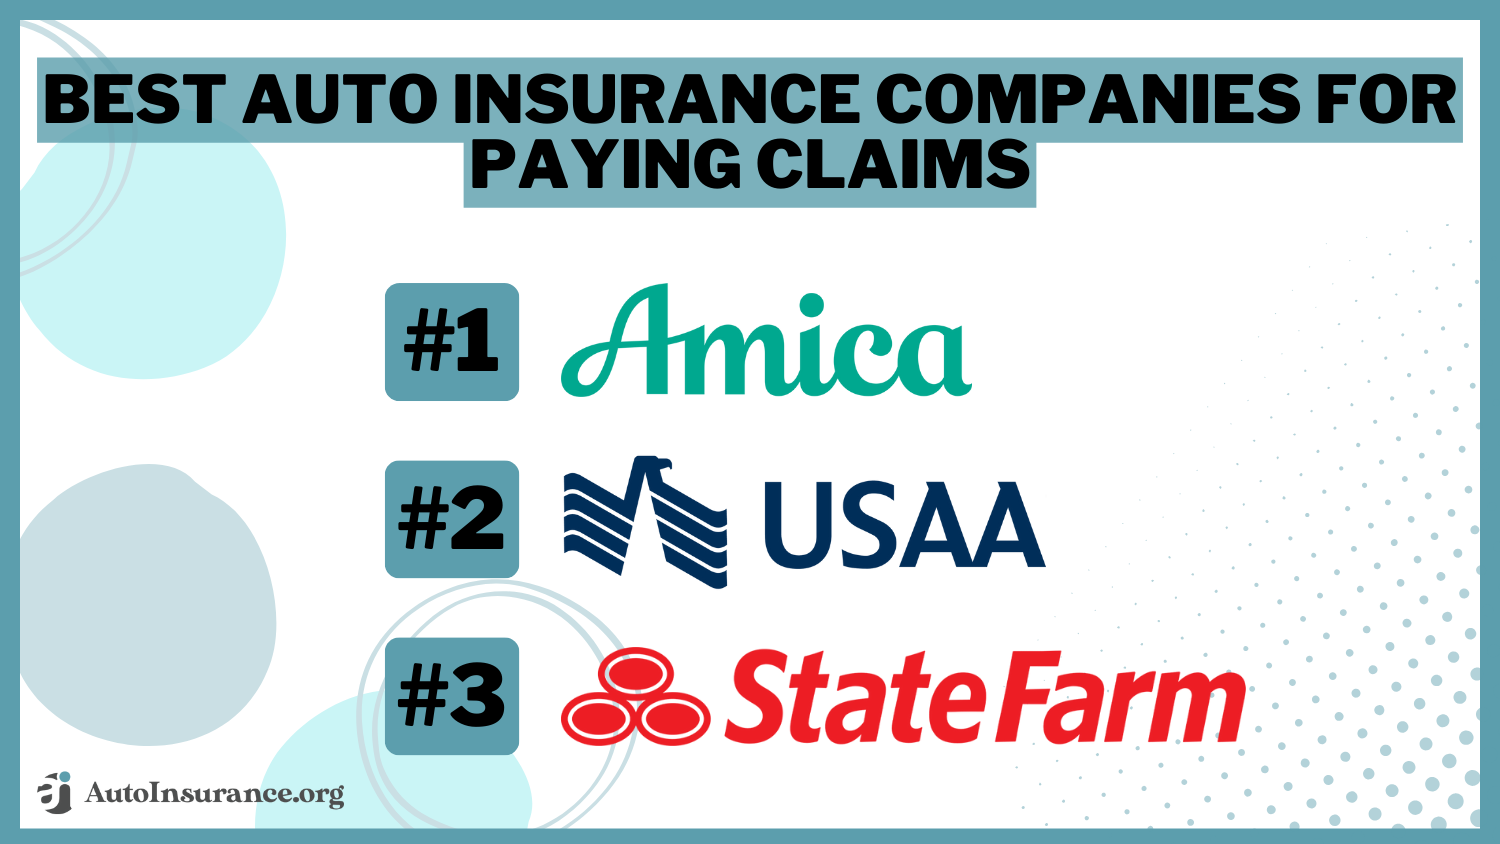 Best Auto Insurance Companies For Paying Claims